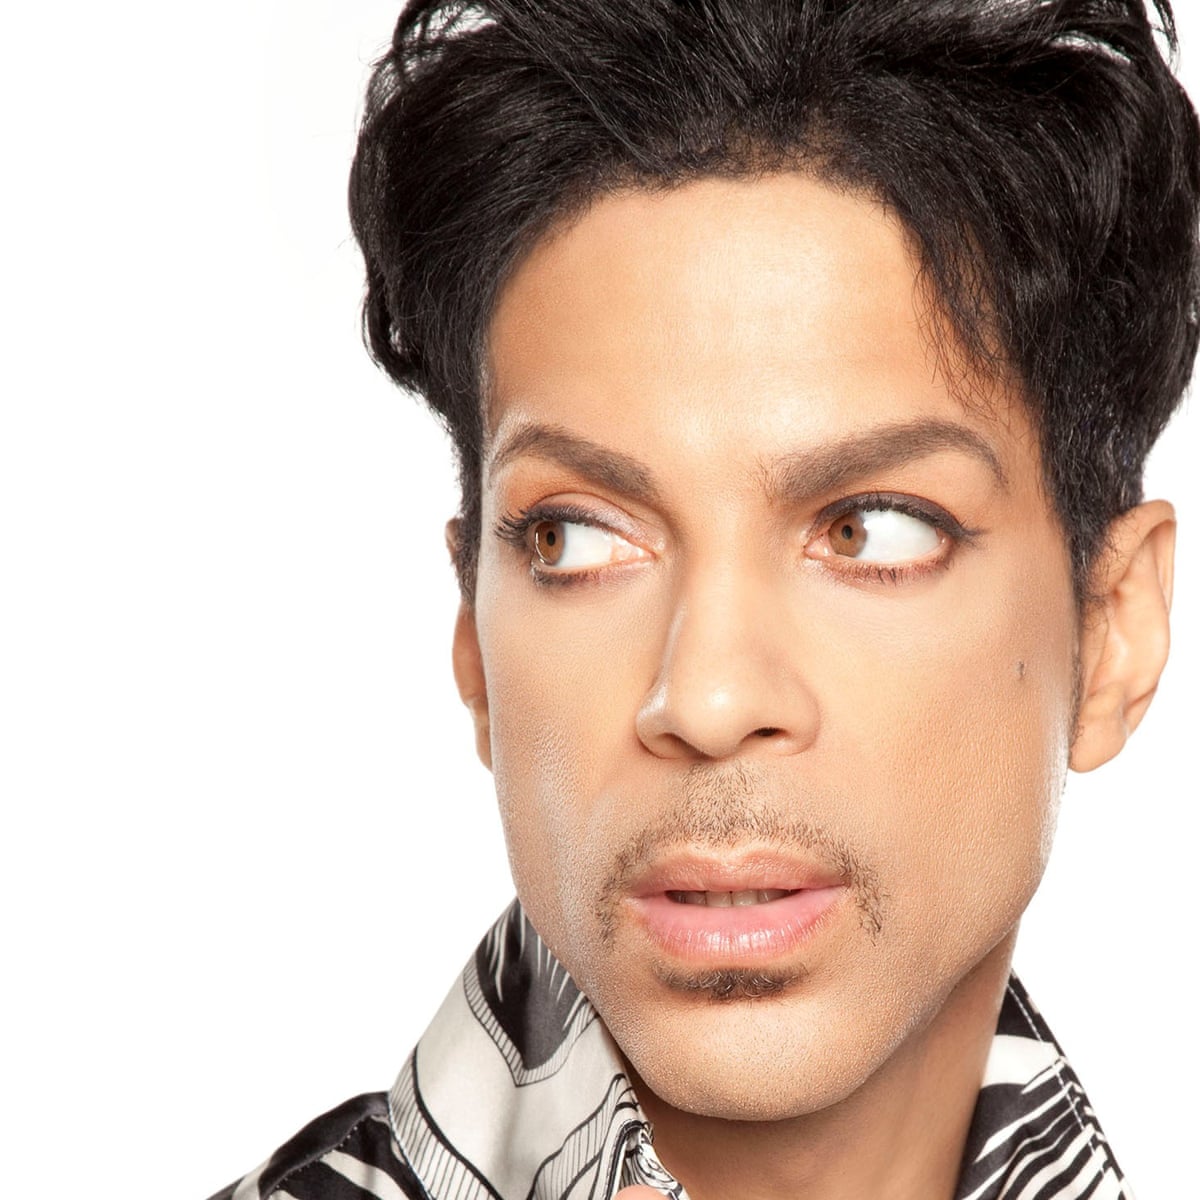 Lost Prince album, Welcome 2 America, to be released in July | Prince | The  Guardian